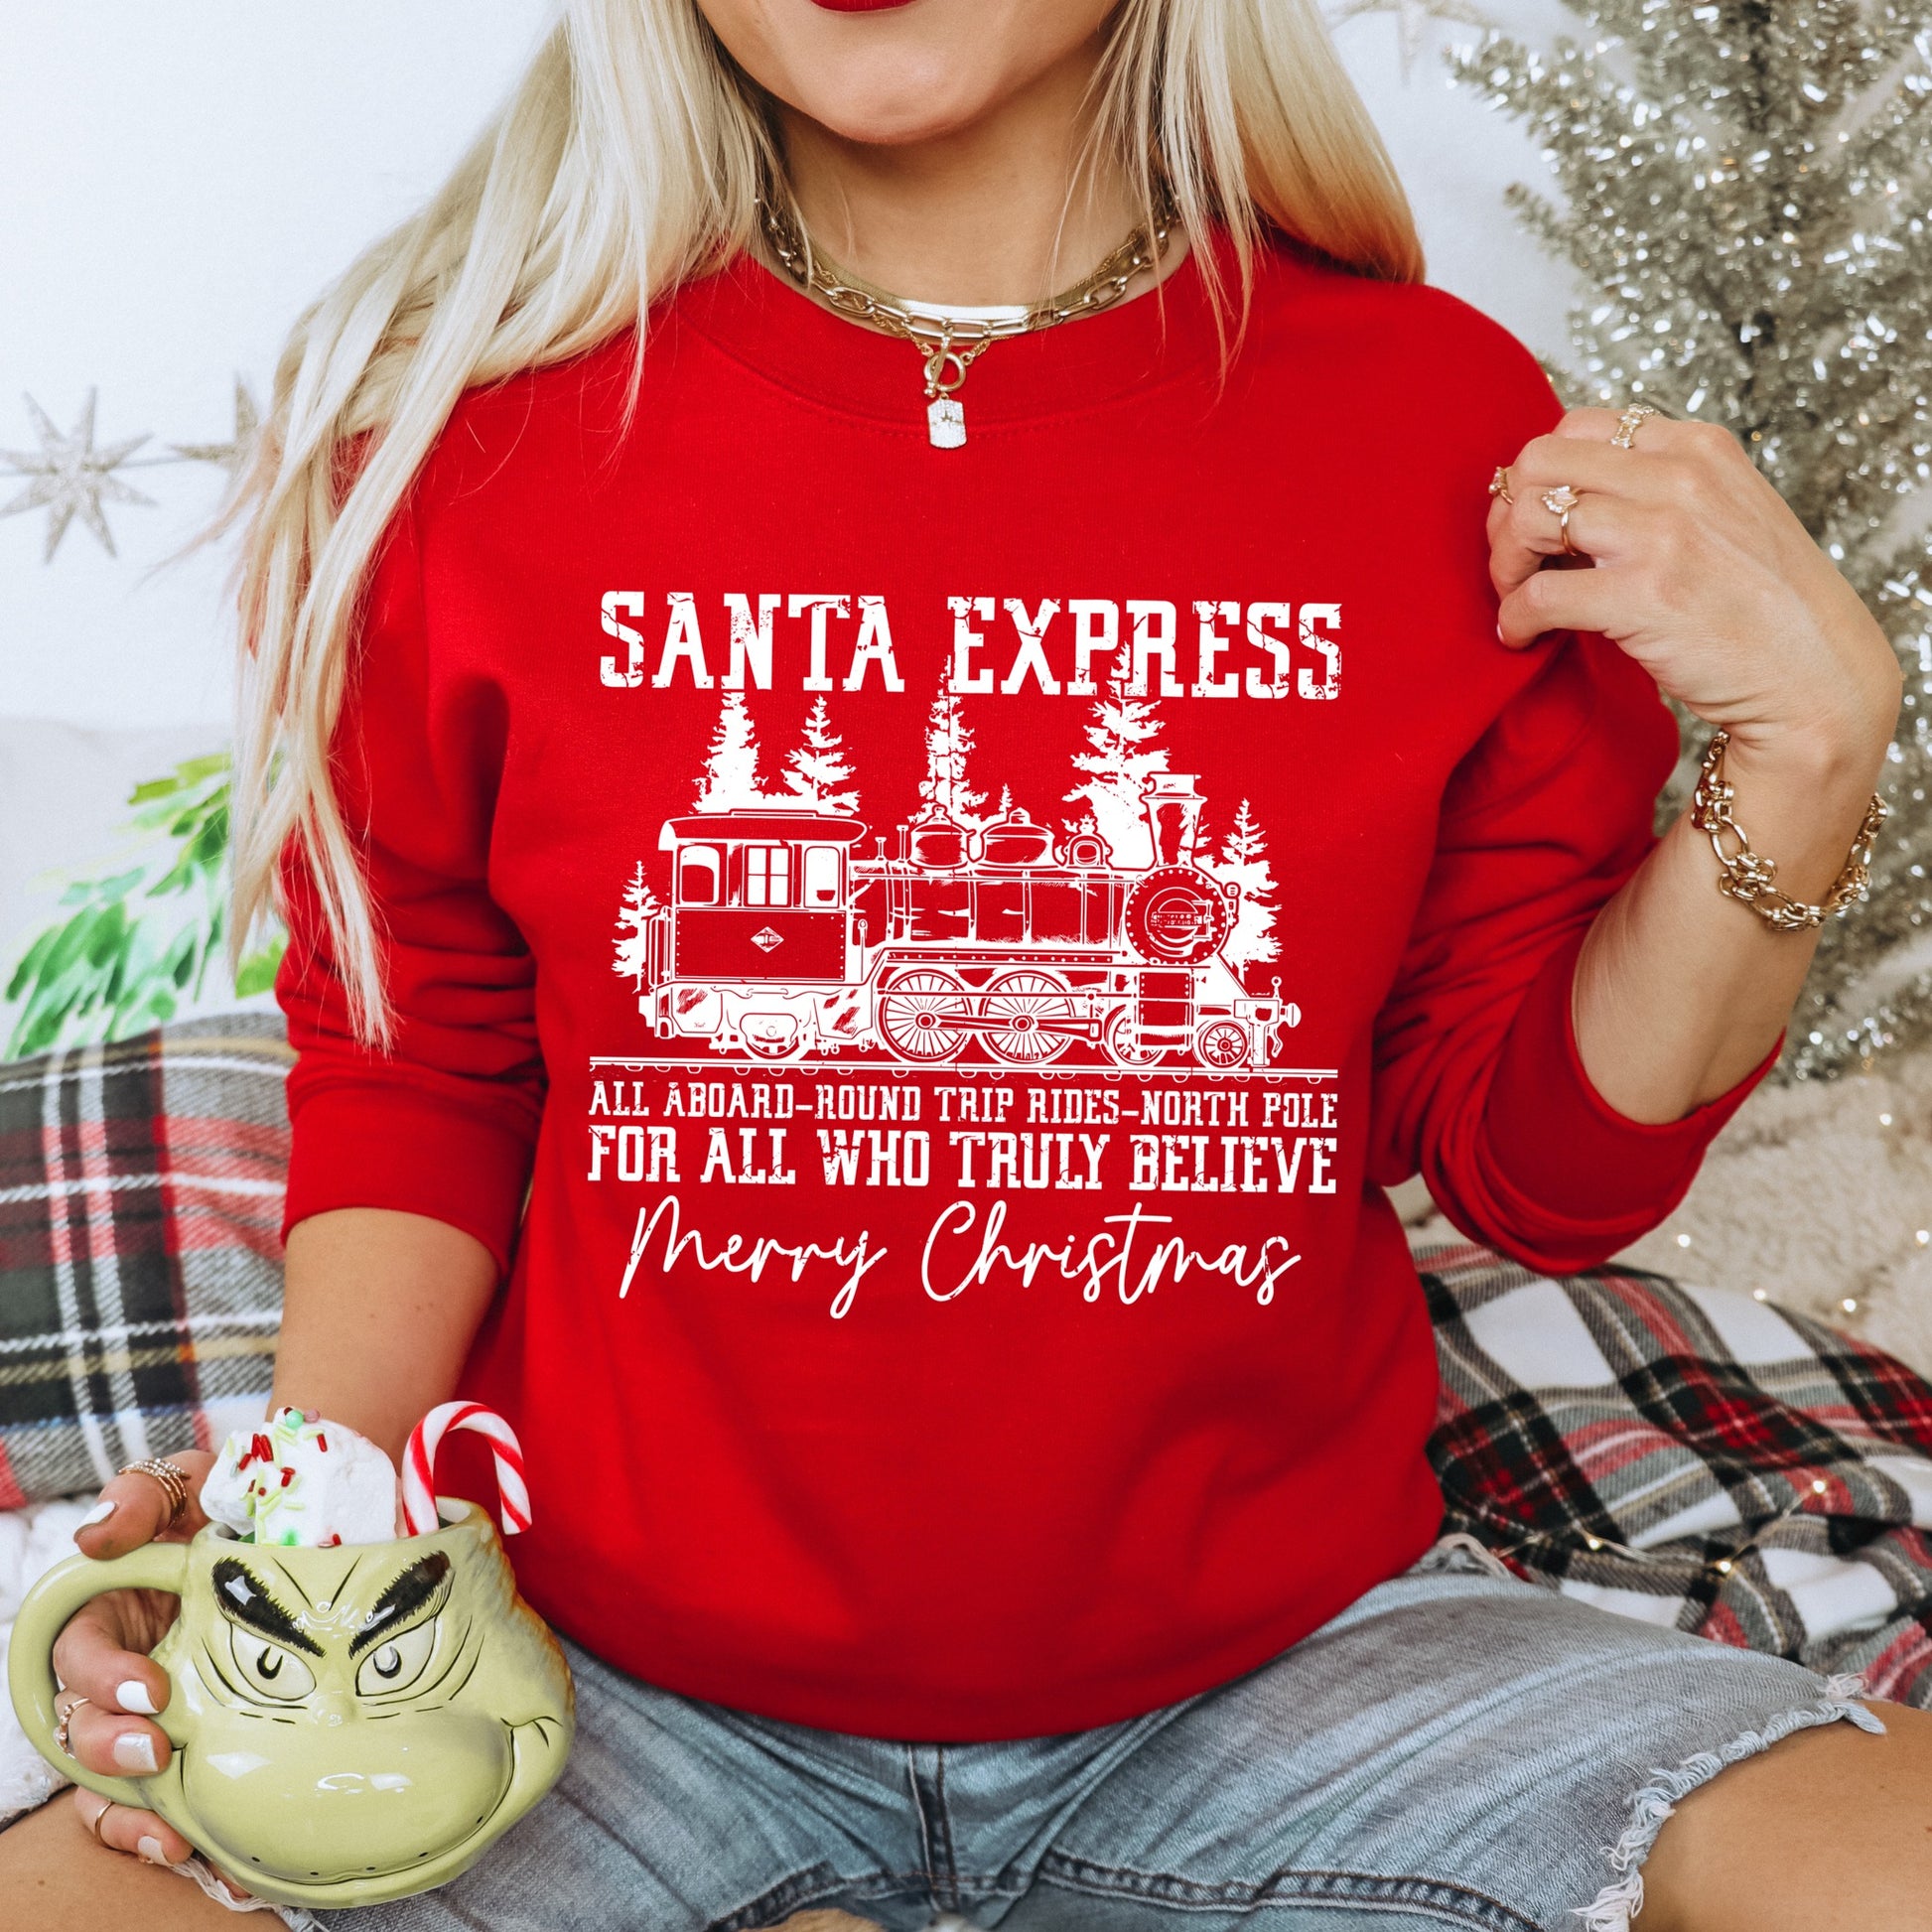 Santa Express Merry Christmas Unisex Crewneck Sweater - Prominent Styles of Sorts- PSS!